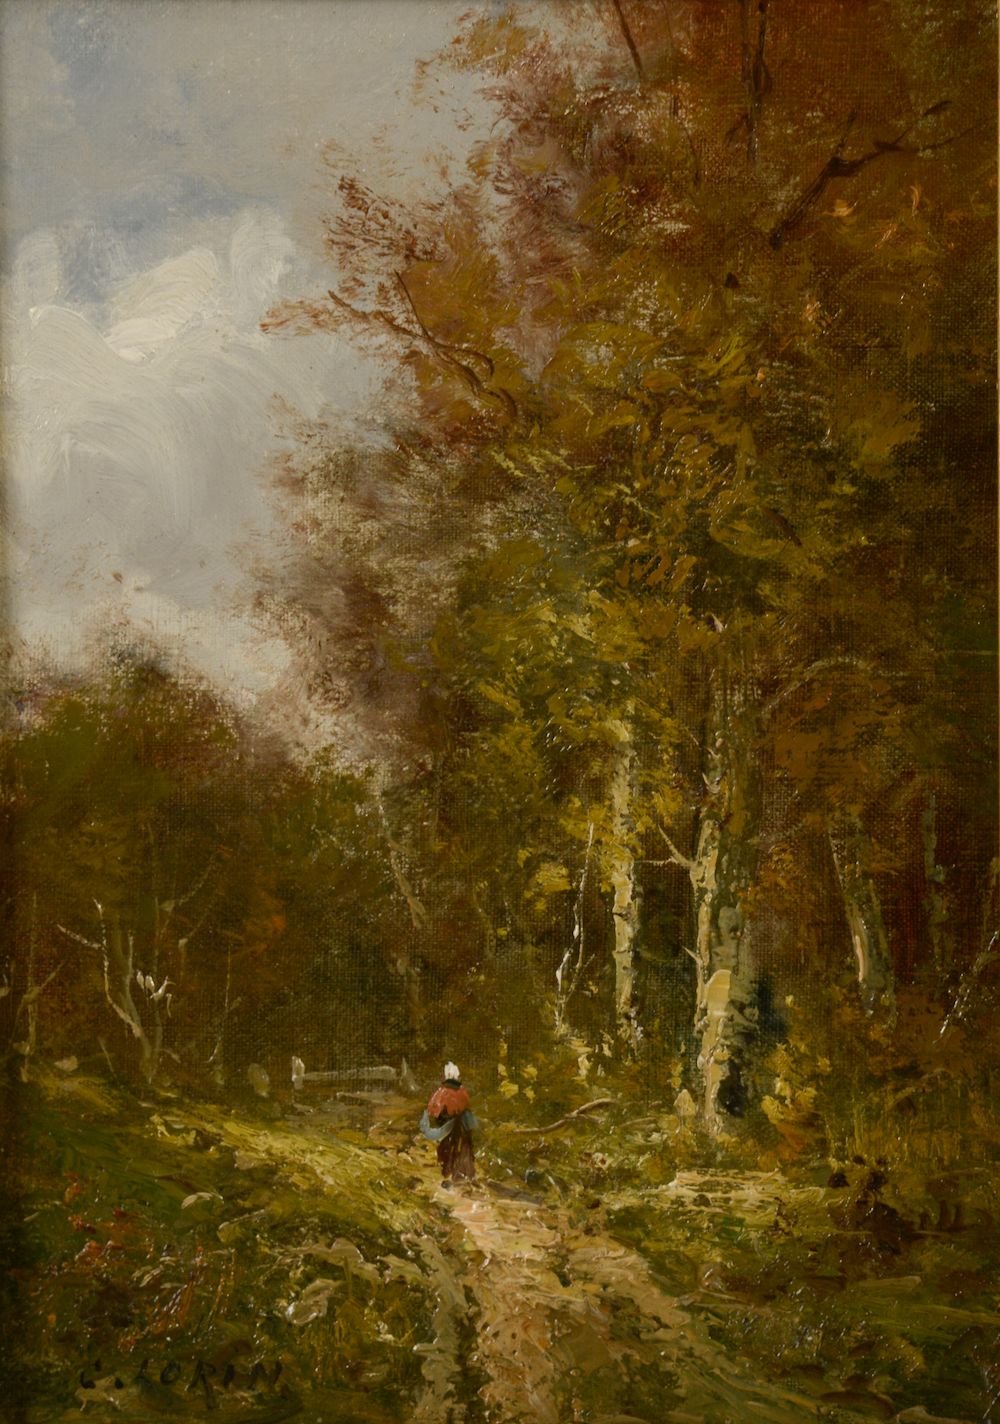 Null C. LORIN (1815-1882).

Woman on a path.

Oil on canvas signed lower left (t&hellip;